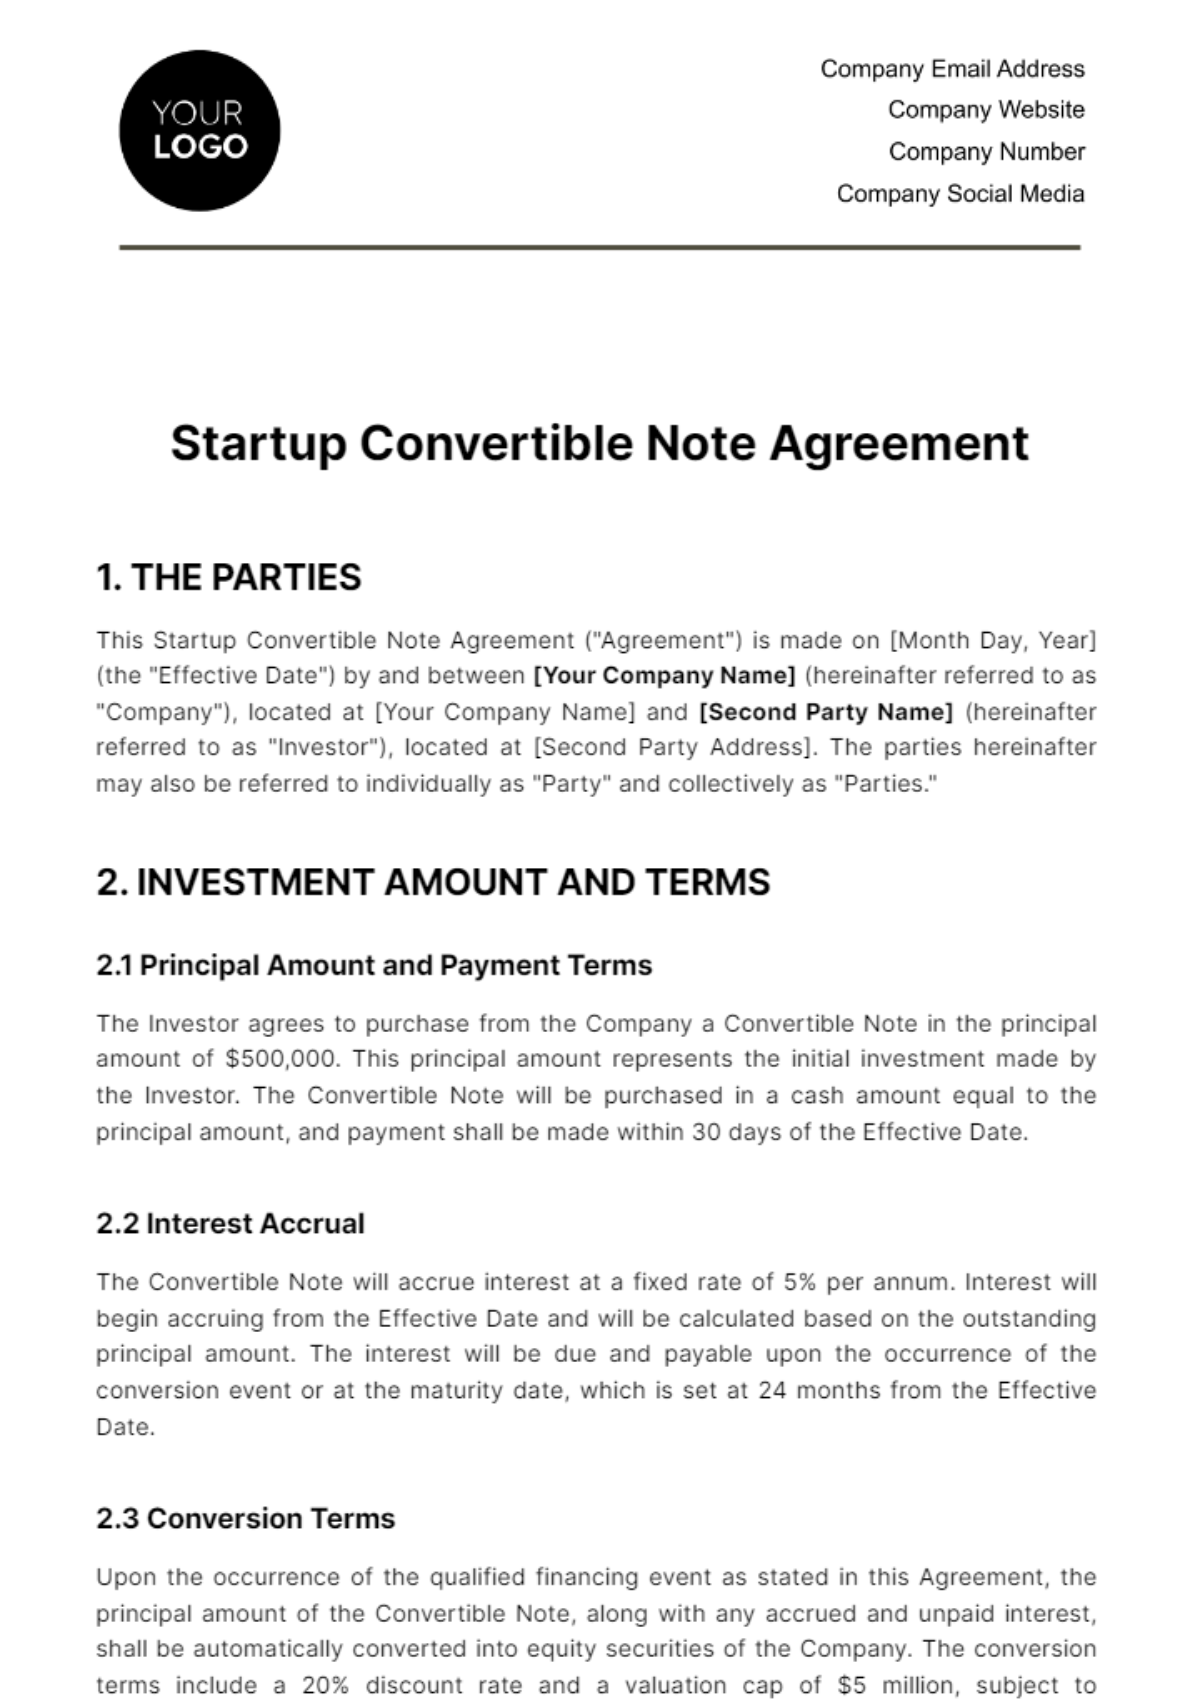 Free Startup Convertible Note Agreement Template